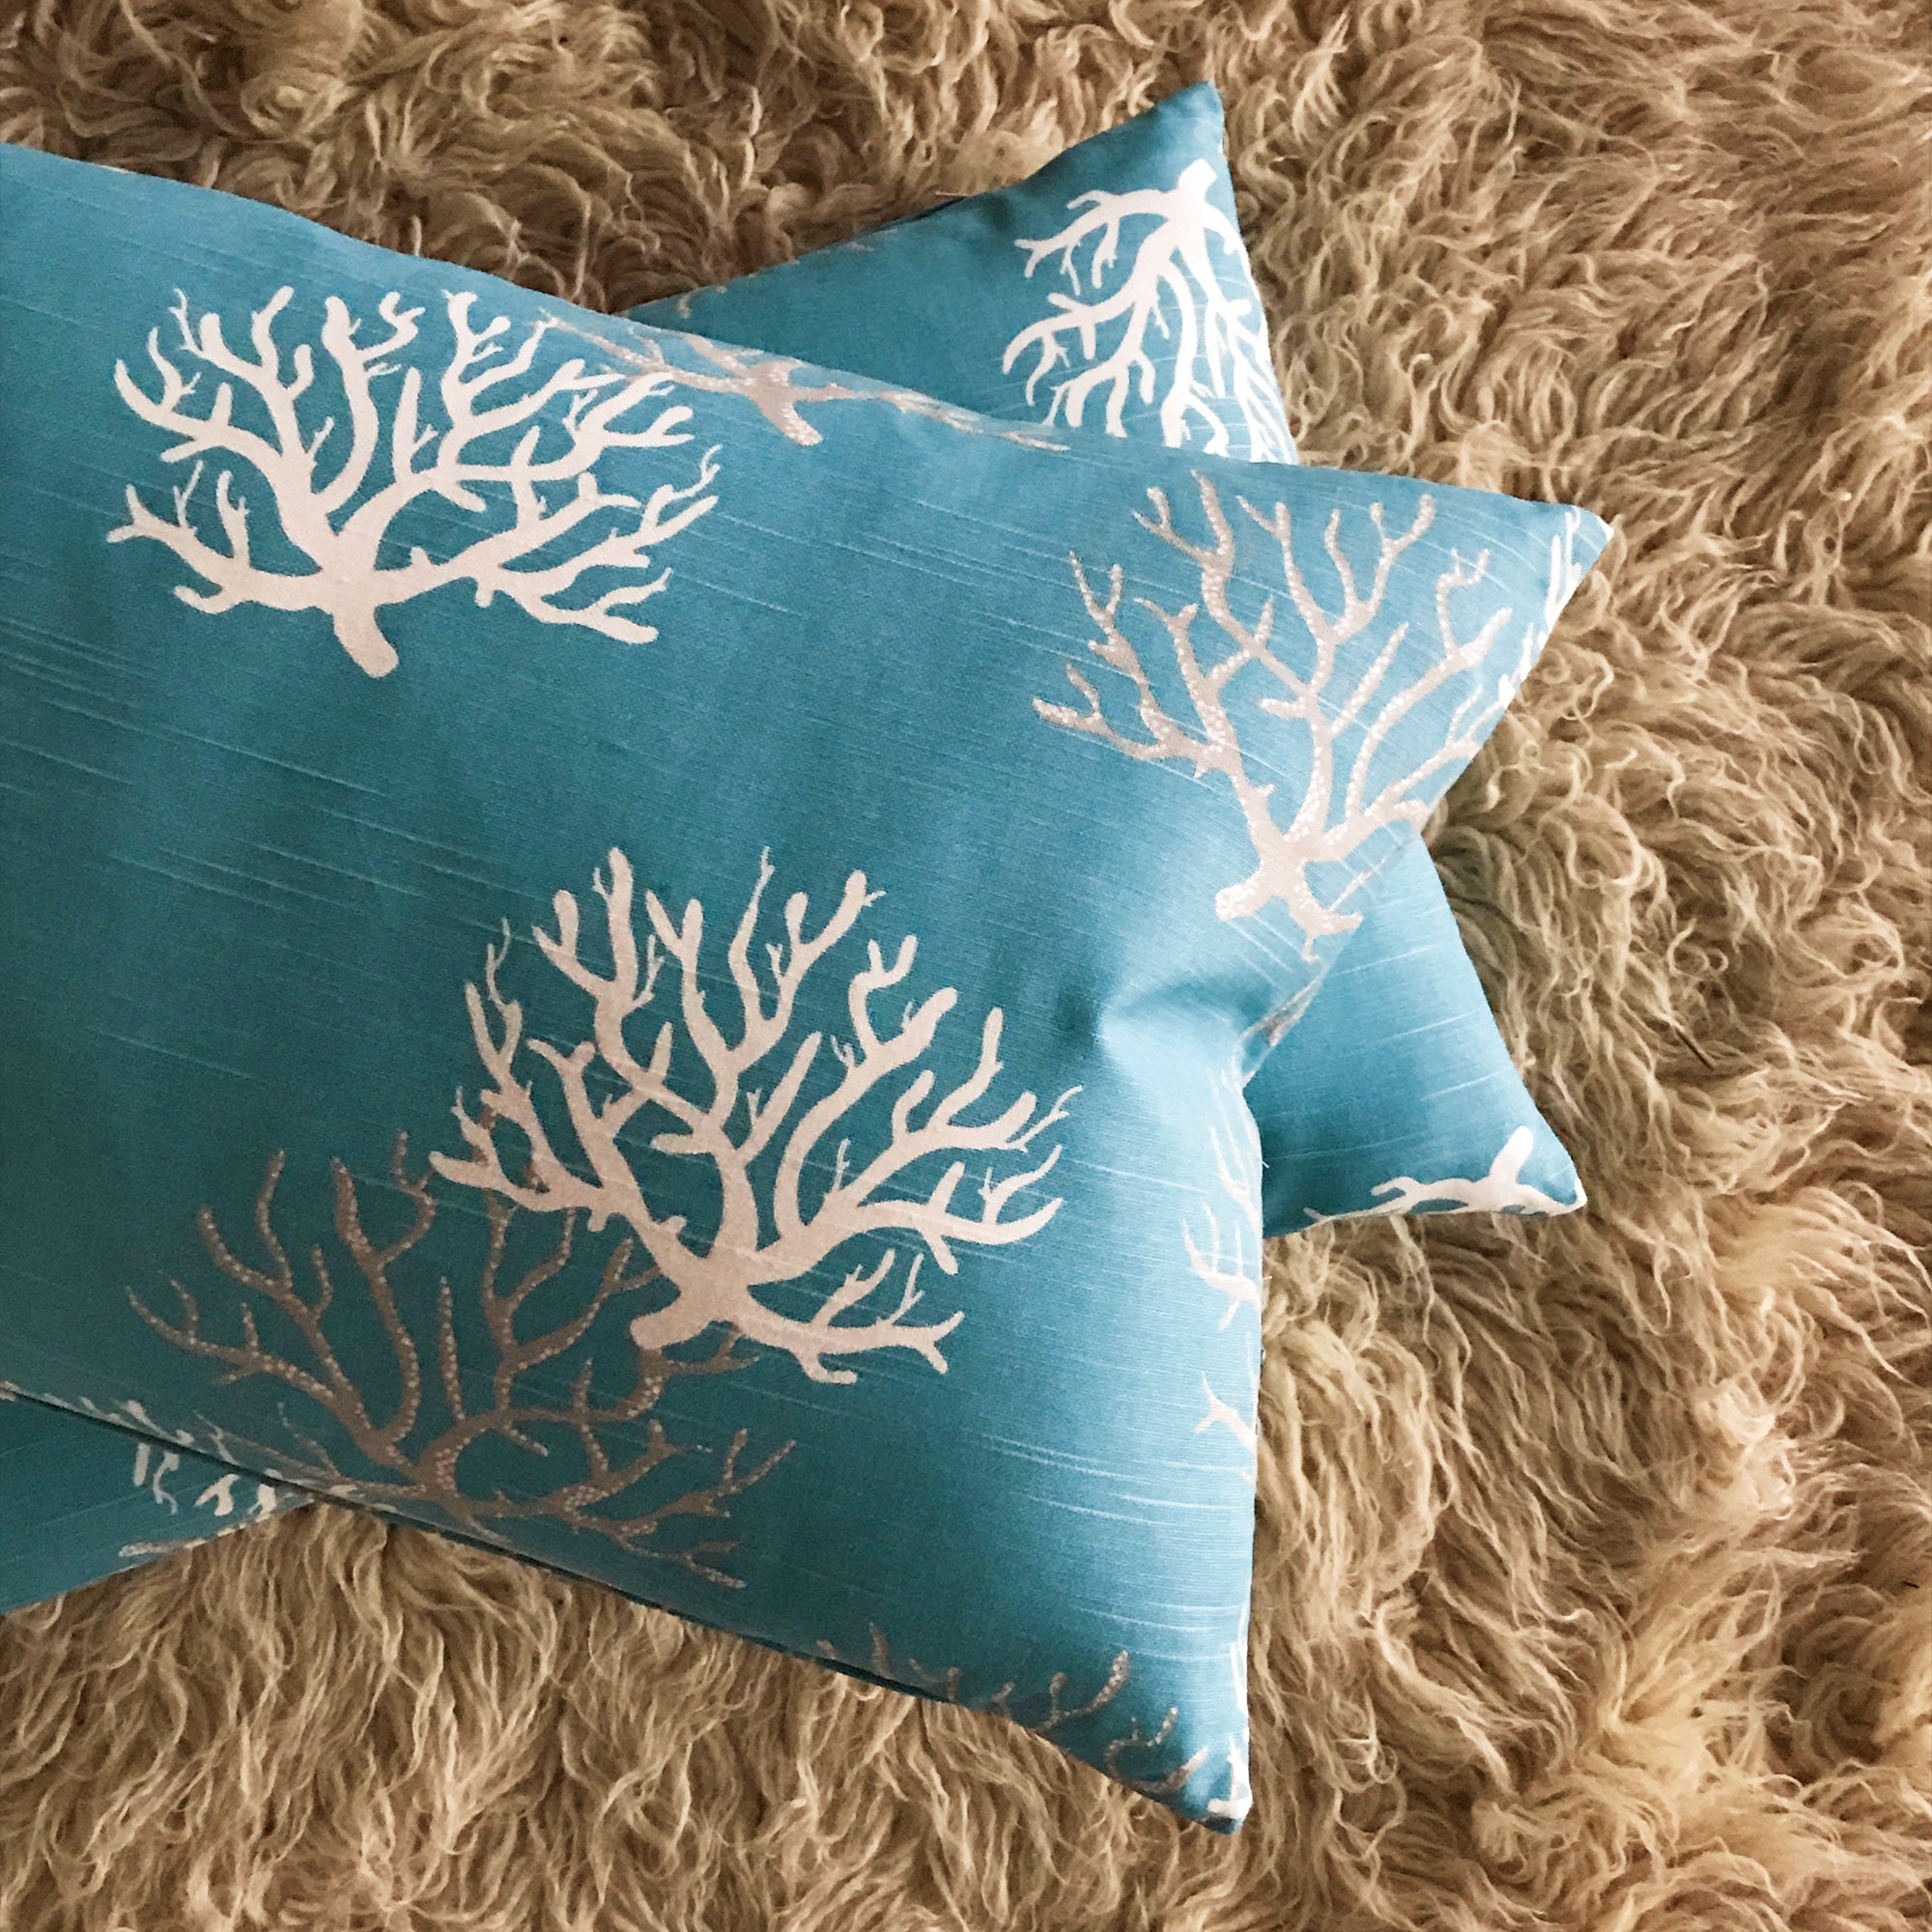 Handmade Brightly Colored Turquoise Tropical Floral Lumbar Throw Pillow